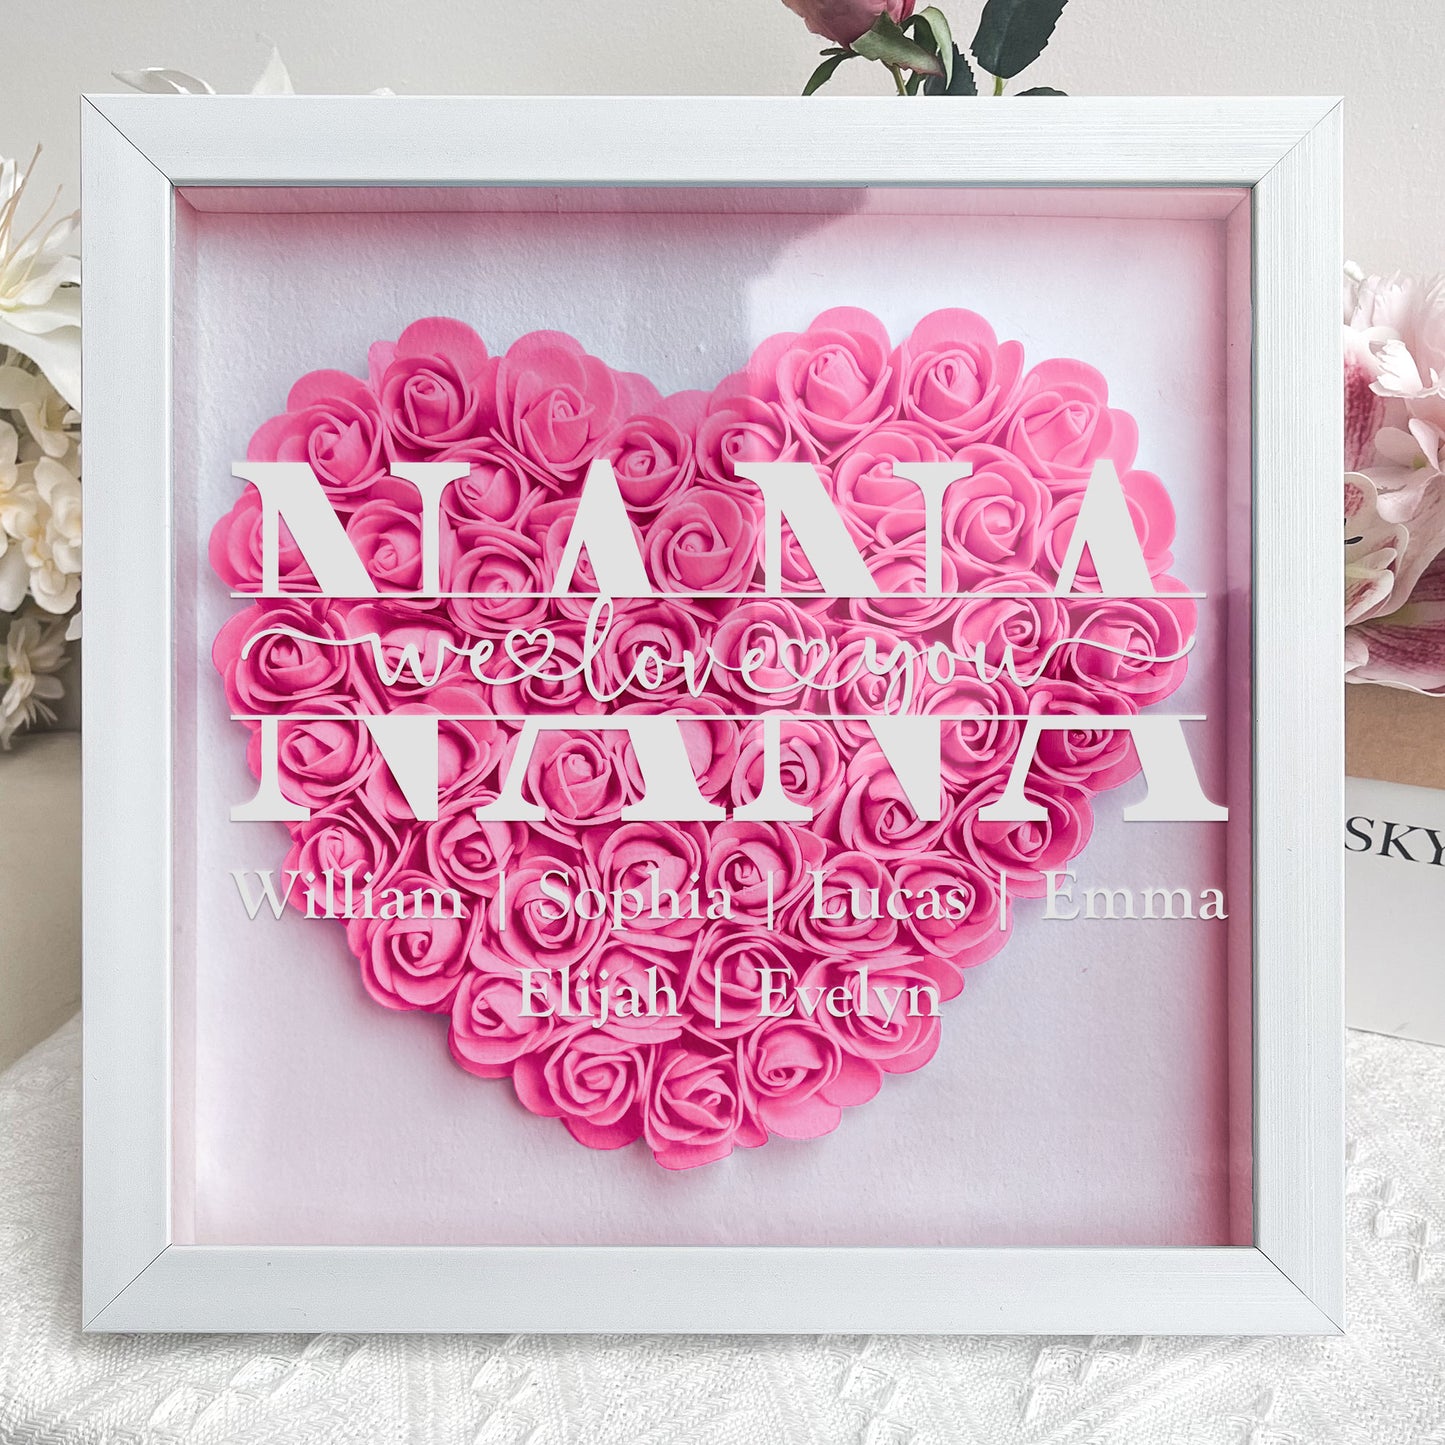 Mom Gift We Love You - Personalized Flower Shadow Box